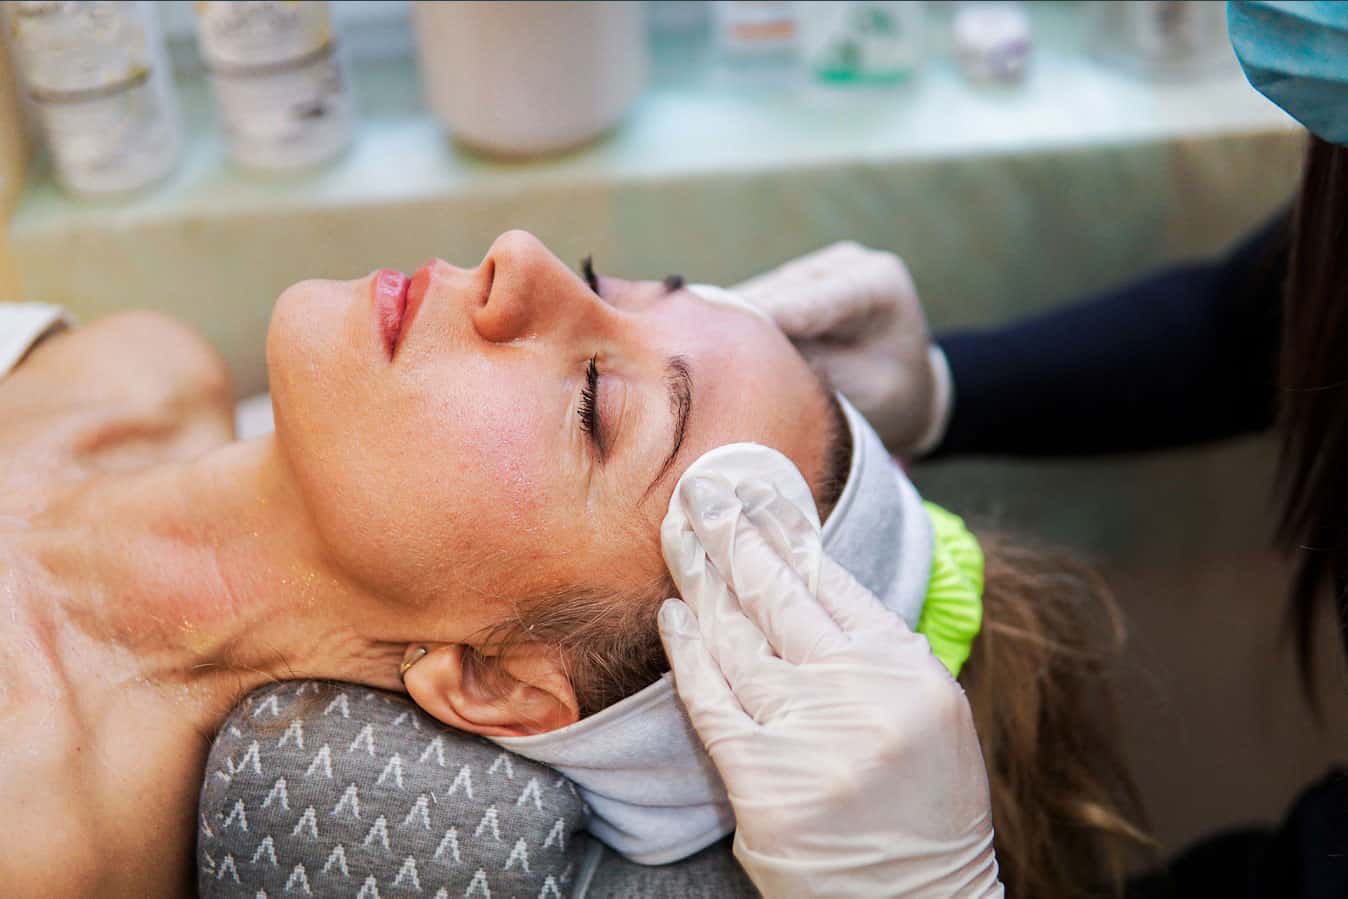 Demand for cosmetic nursing continues to rise